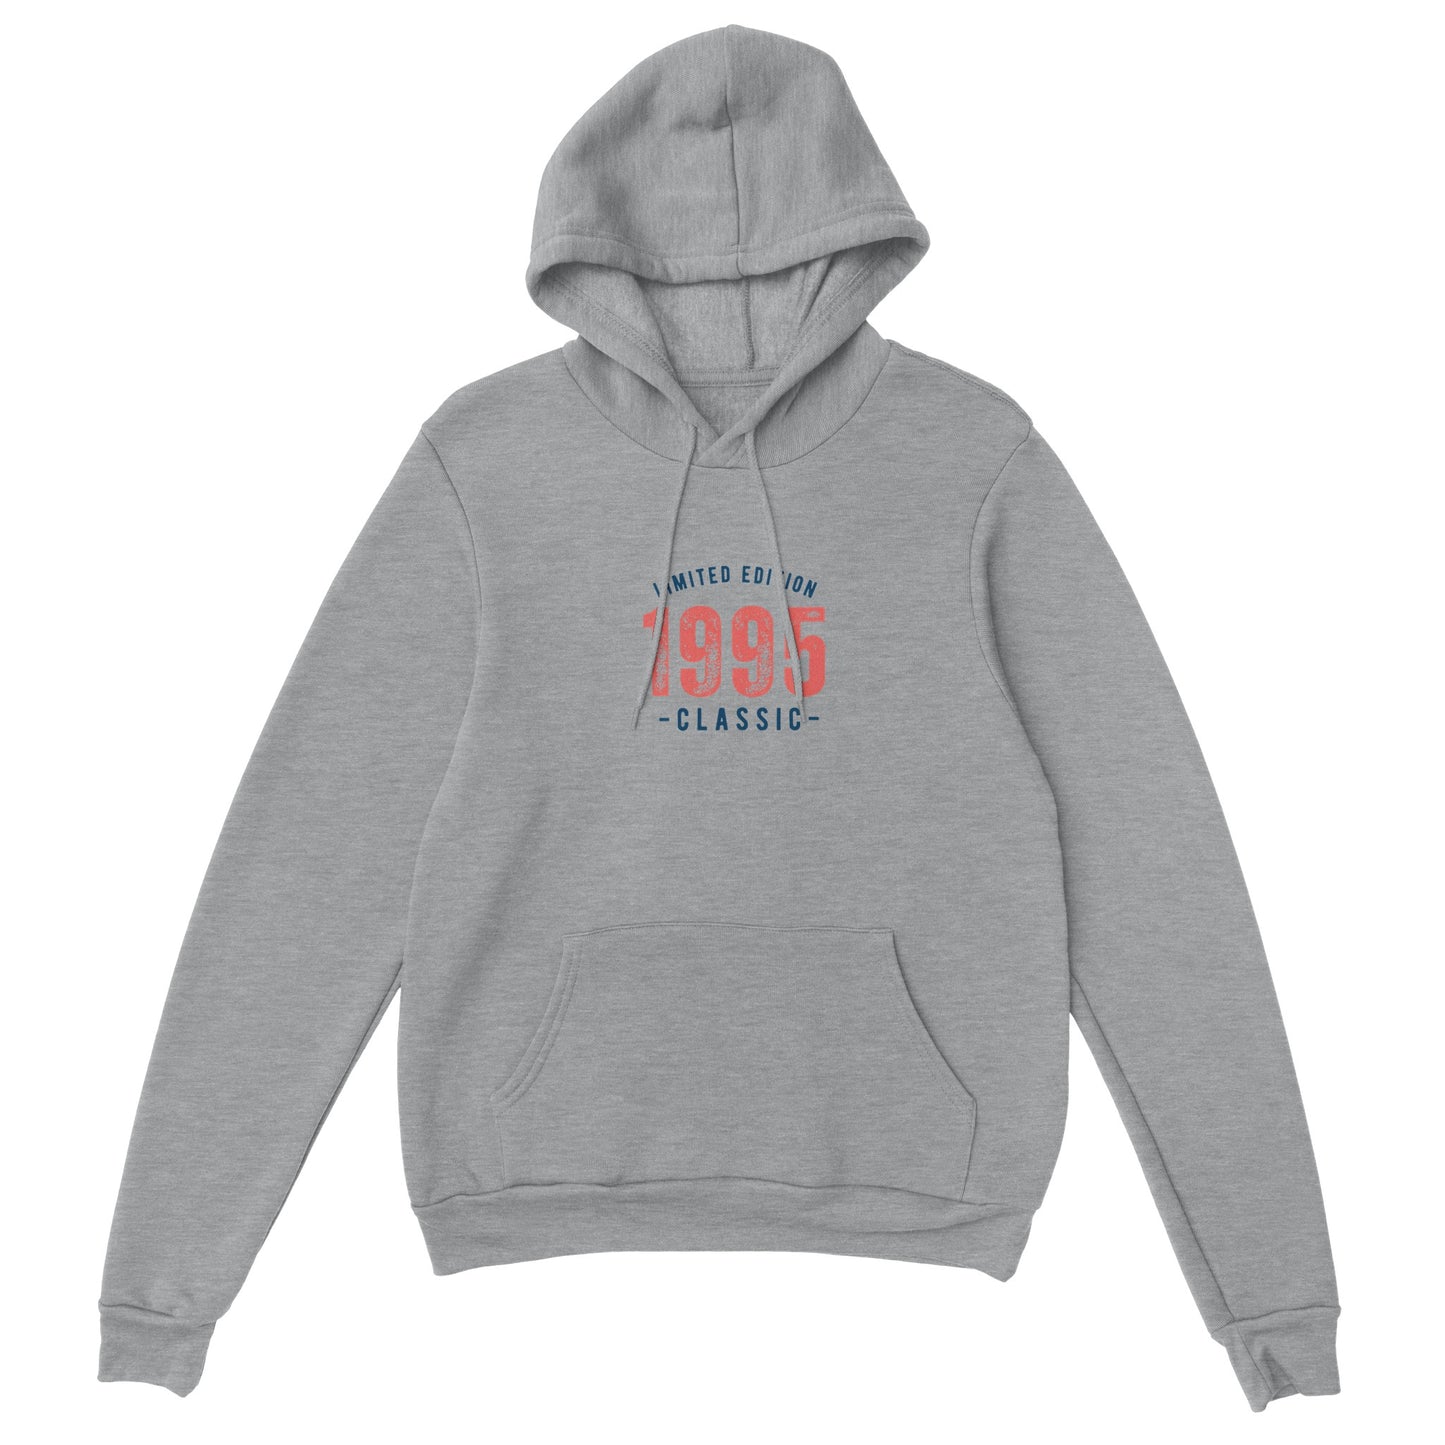 Limited Edition 1995 Classic - Classic Unisex Pullover Hoodie